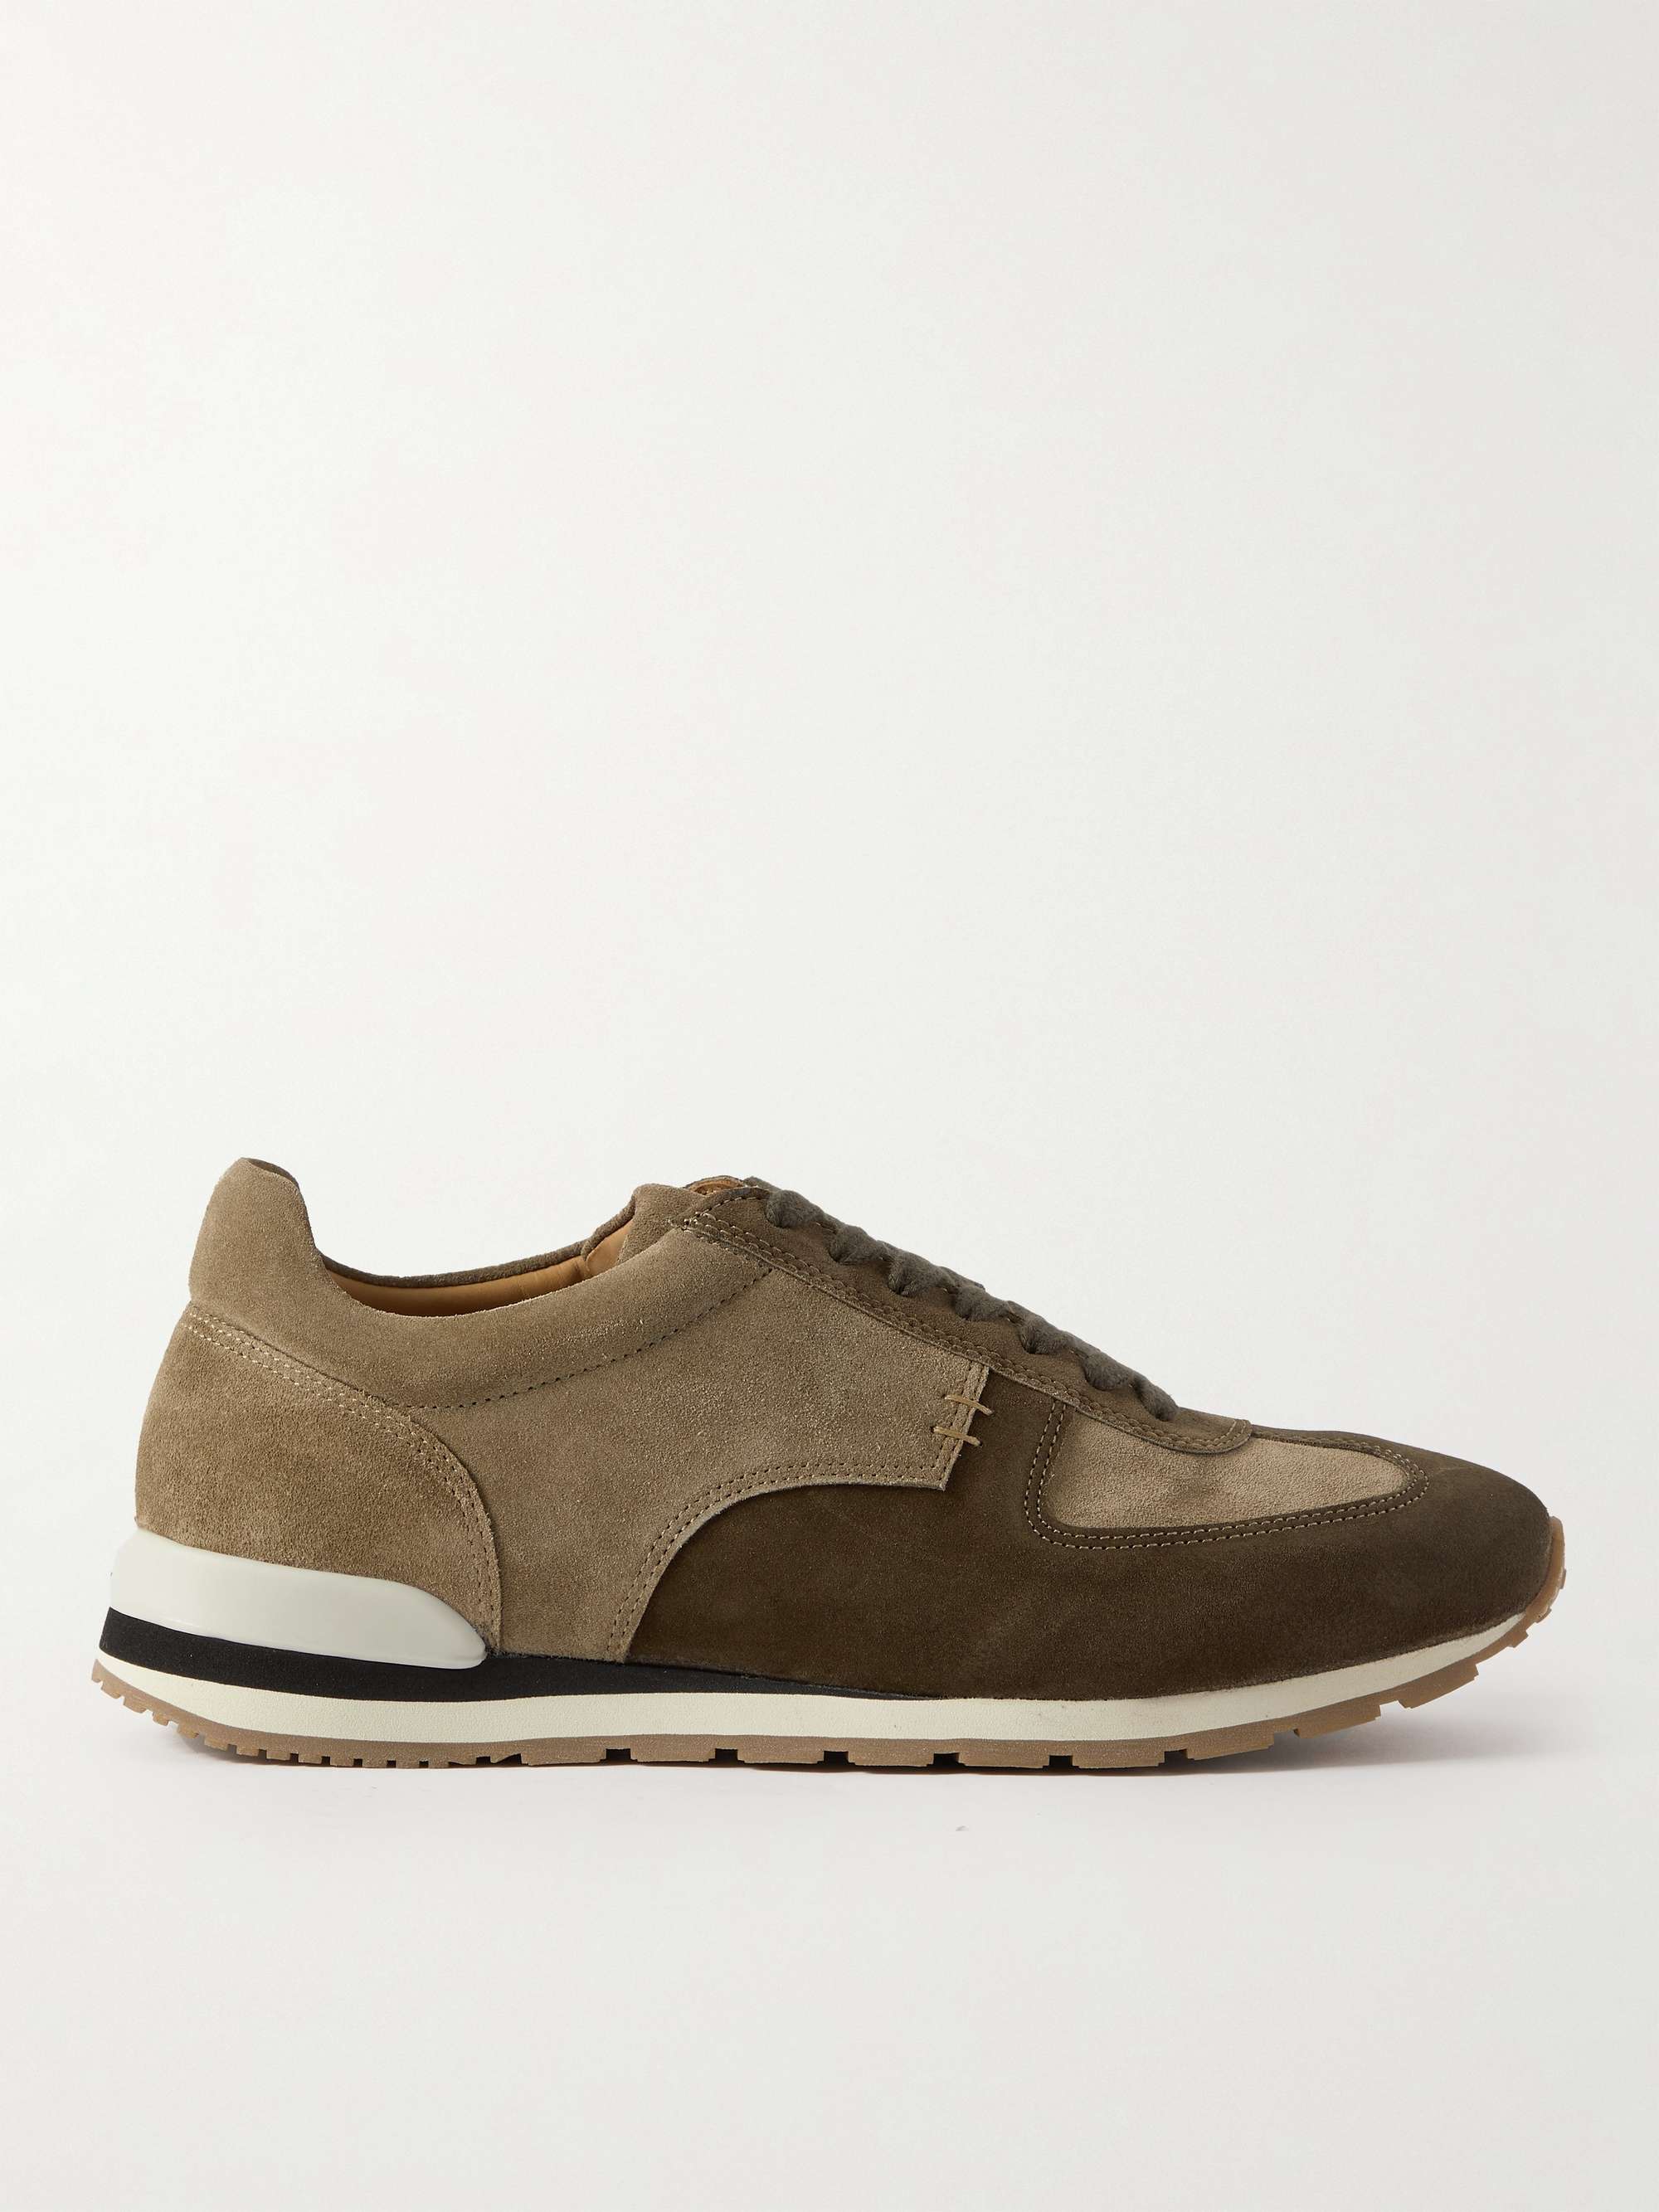 MR P. '70s Regenerated Suede by evolo® Sneakers